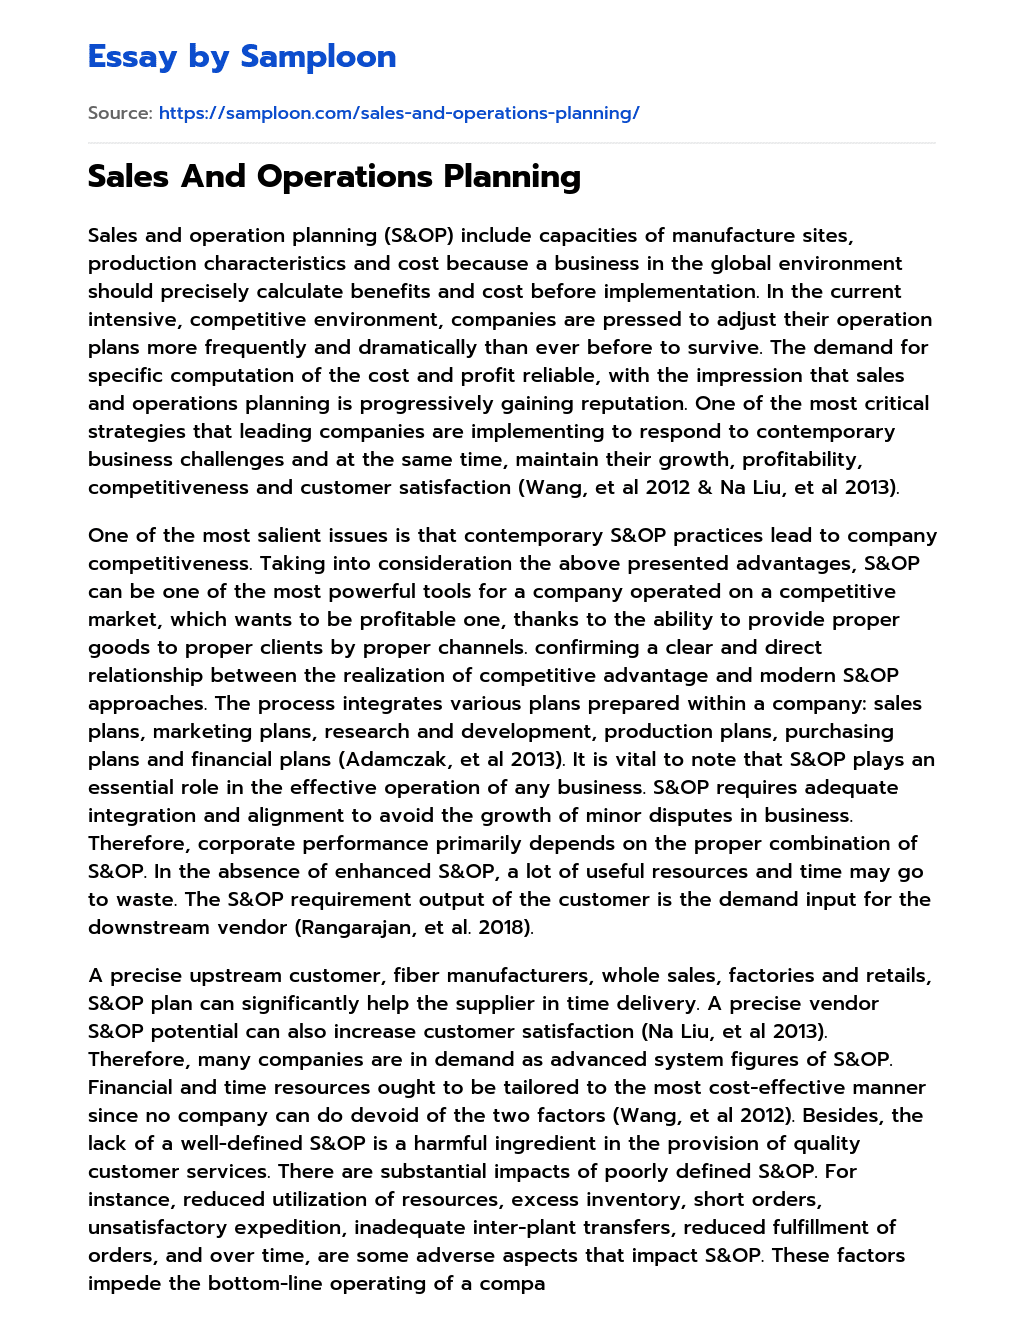 Sales And Operations Planning essay